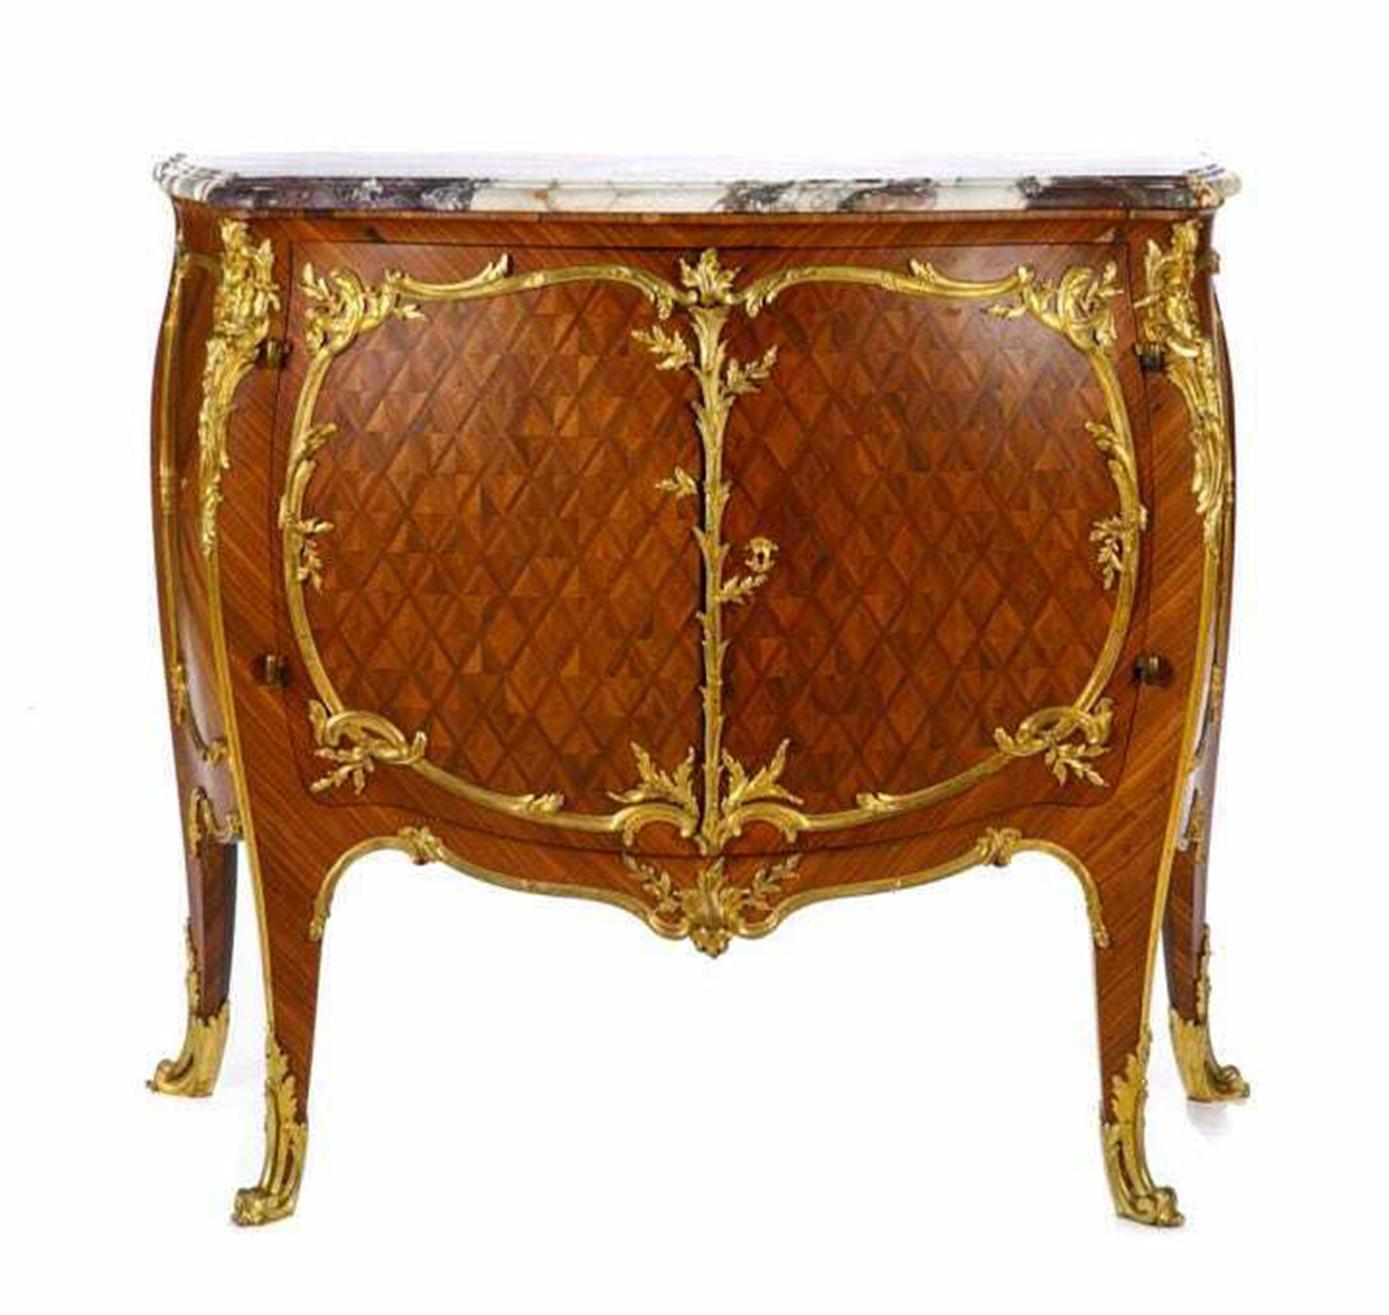 Fine quality french ormolu-mounted marble top commode with rare diamond-shaped parquetry veneers

Two door cupboard bombe front with gilt bronze mounts, cabriole capped feet. The doors with diamond-shaped parquetry veneers. With period marble top.